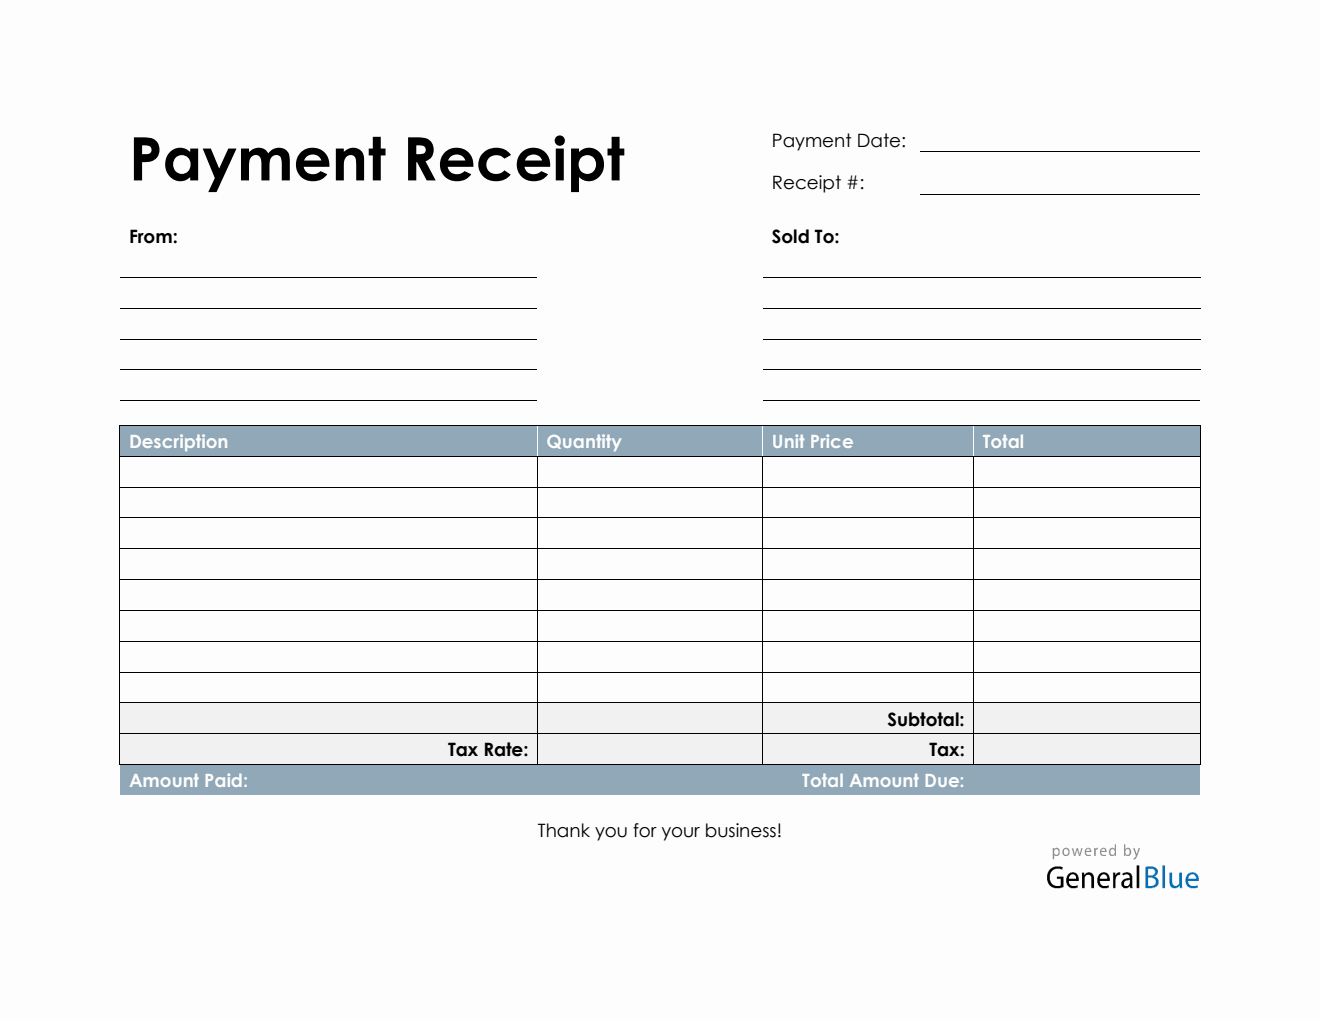 Payment Receipt Template in PDF (Basic)